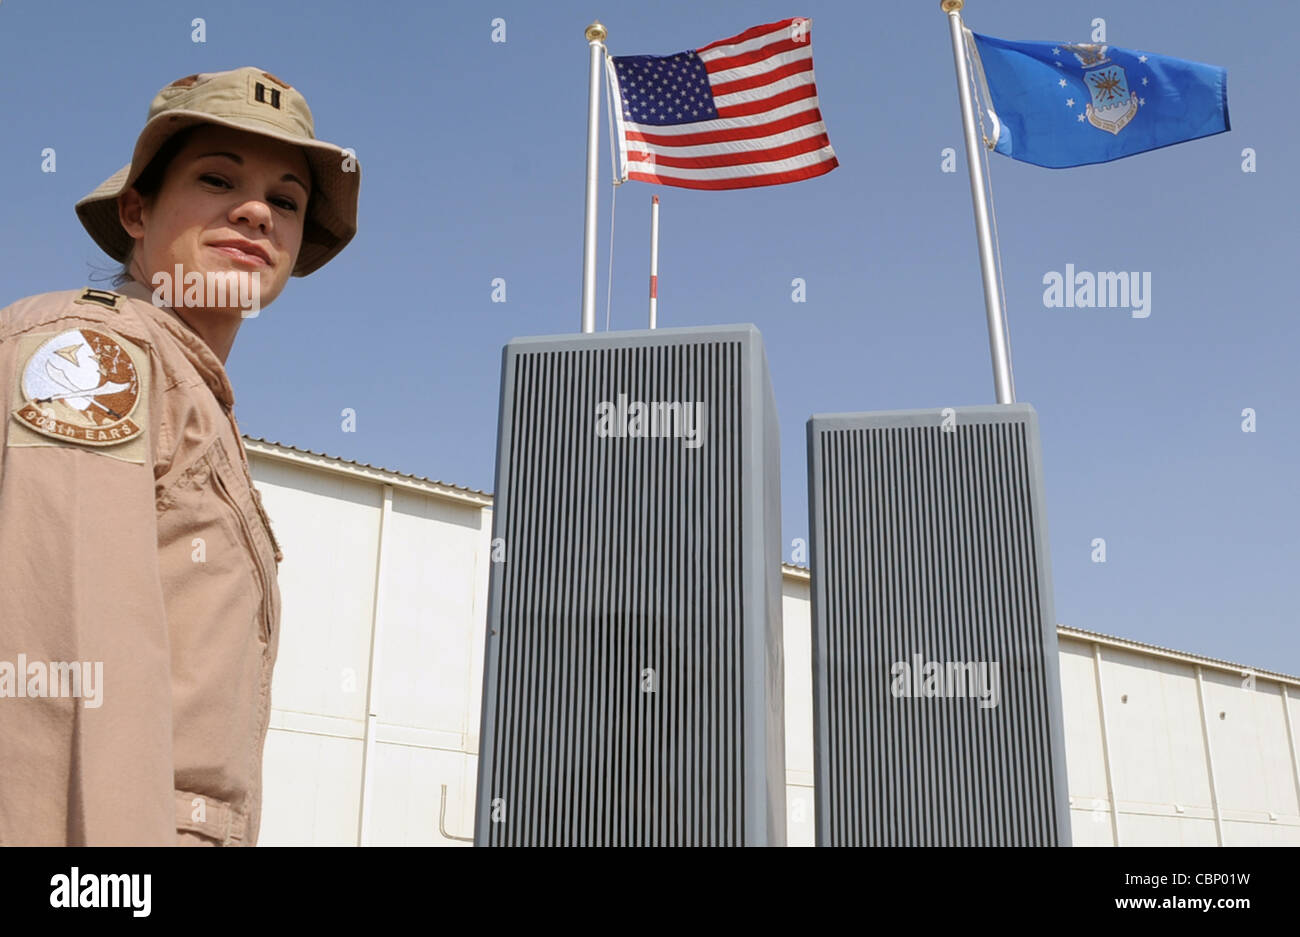 Capt. Hillary Wykes, a KC-10 Extender pilot with the 908th Expeditionary Air Refueling Squadron, stands by the 380th Air Expeditionary Wing's Sept. 11, 2001, memorial at an air base in Southwest Asia on Jan. 13, 2010. Captain Wykes is deployed from the 9th Air Refueling Squadron at Travis Air Force Base, Calif., and her hometown is Plano, Ill. Stock Photo